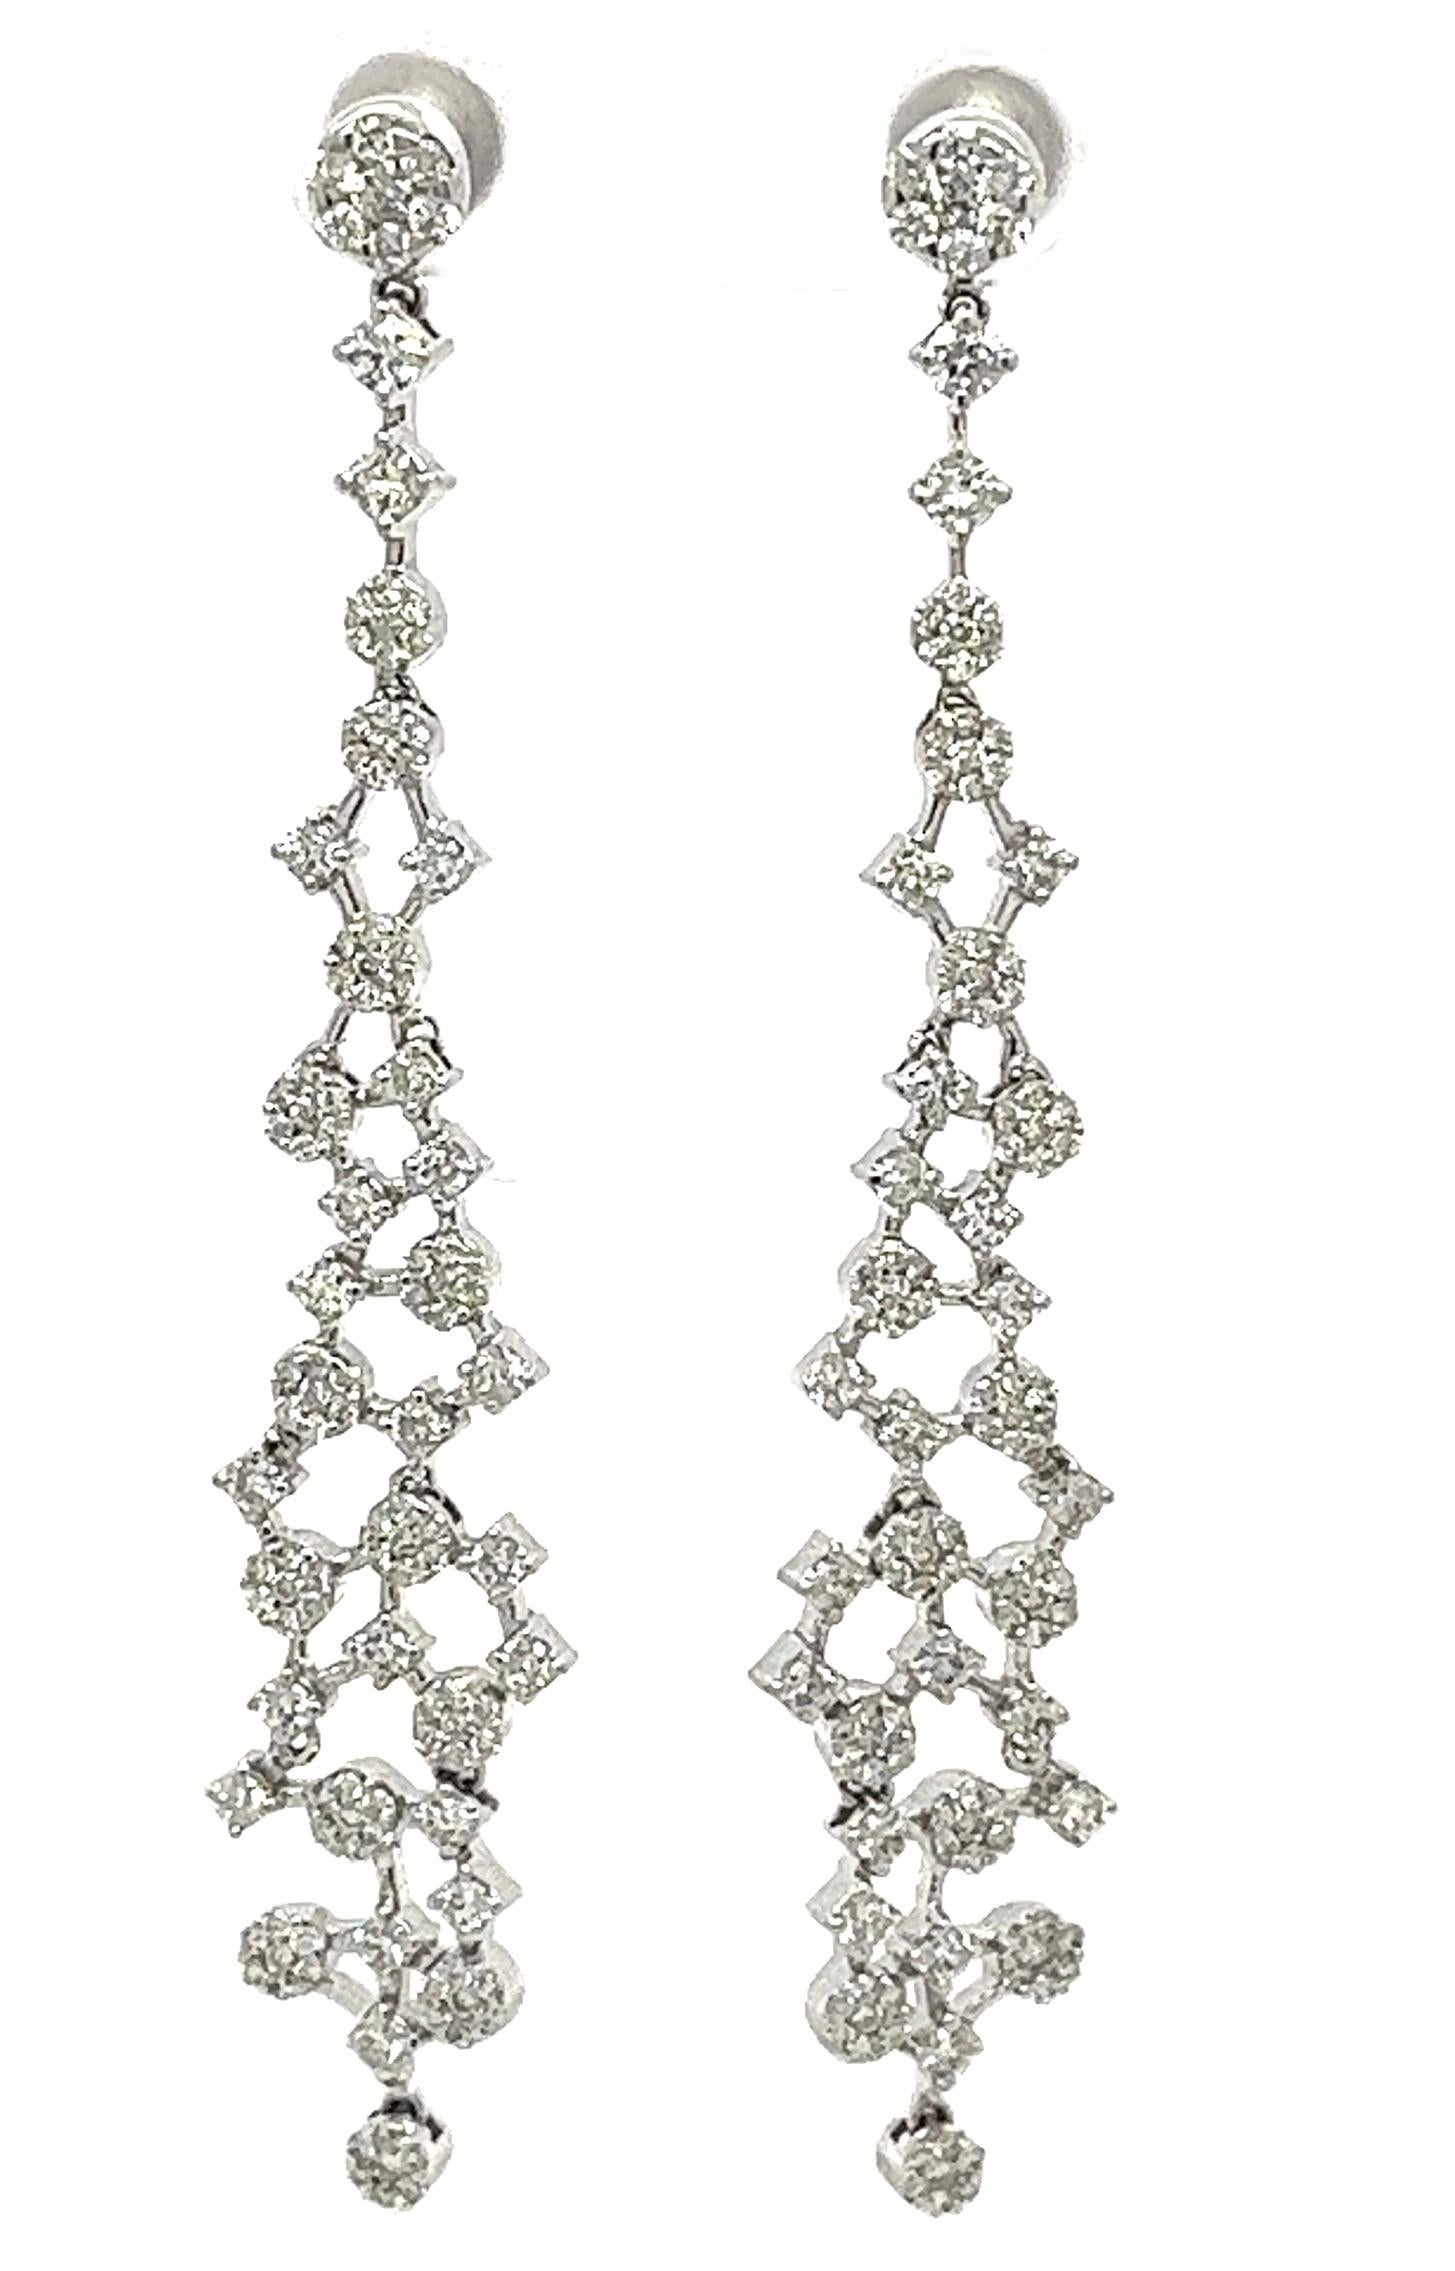 18K White Gold Earrings with Diamonds
18K White Gold - 9.04 GM
236 Diamonds - 1.89 CT
Crafted with exquisite attention to detail, these tassel-shaped diamond earrings from Althoff Jewelry are the perfect statement piece for any occasion. The